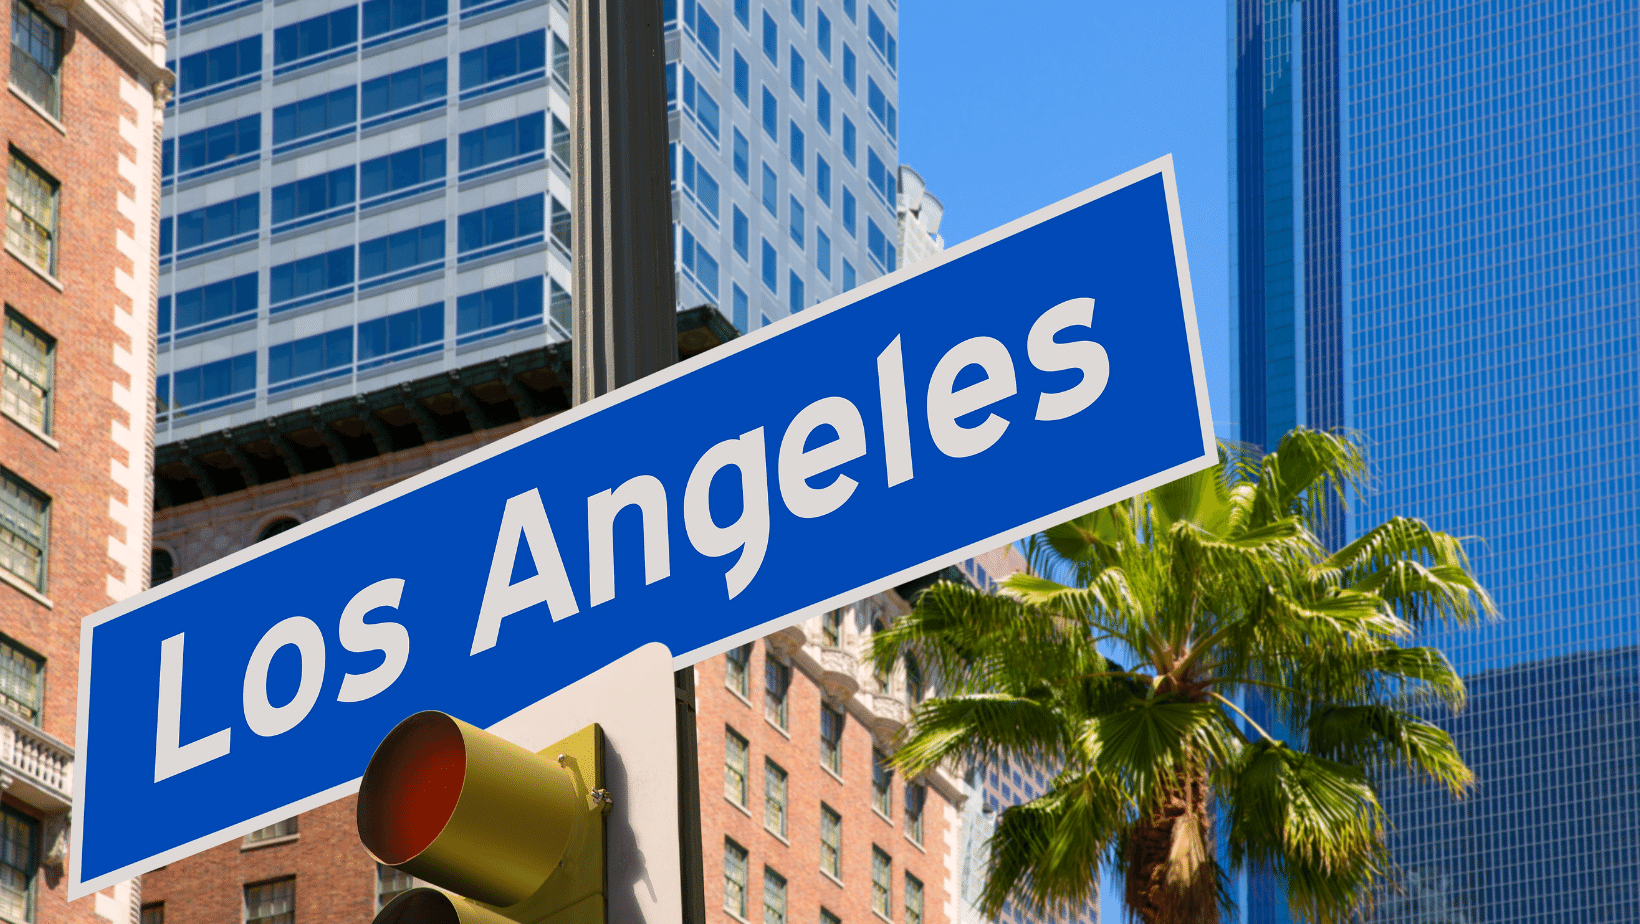 A street sign with the words los angeles on it.